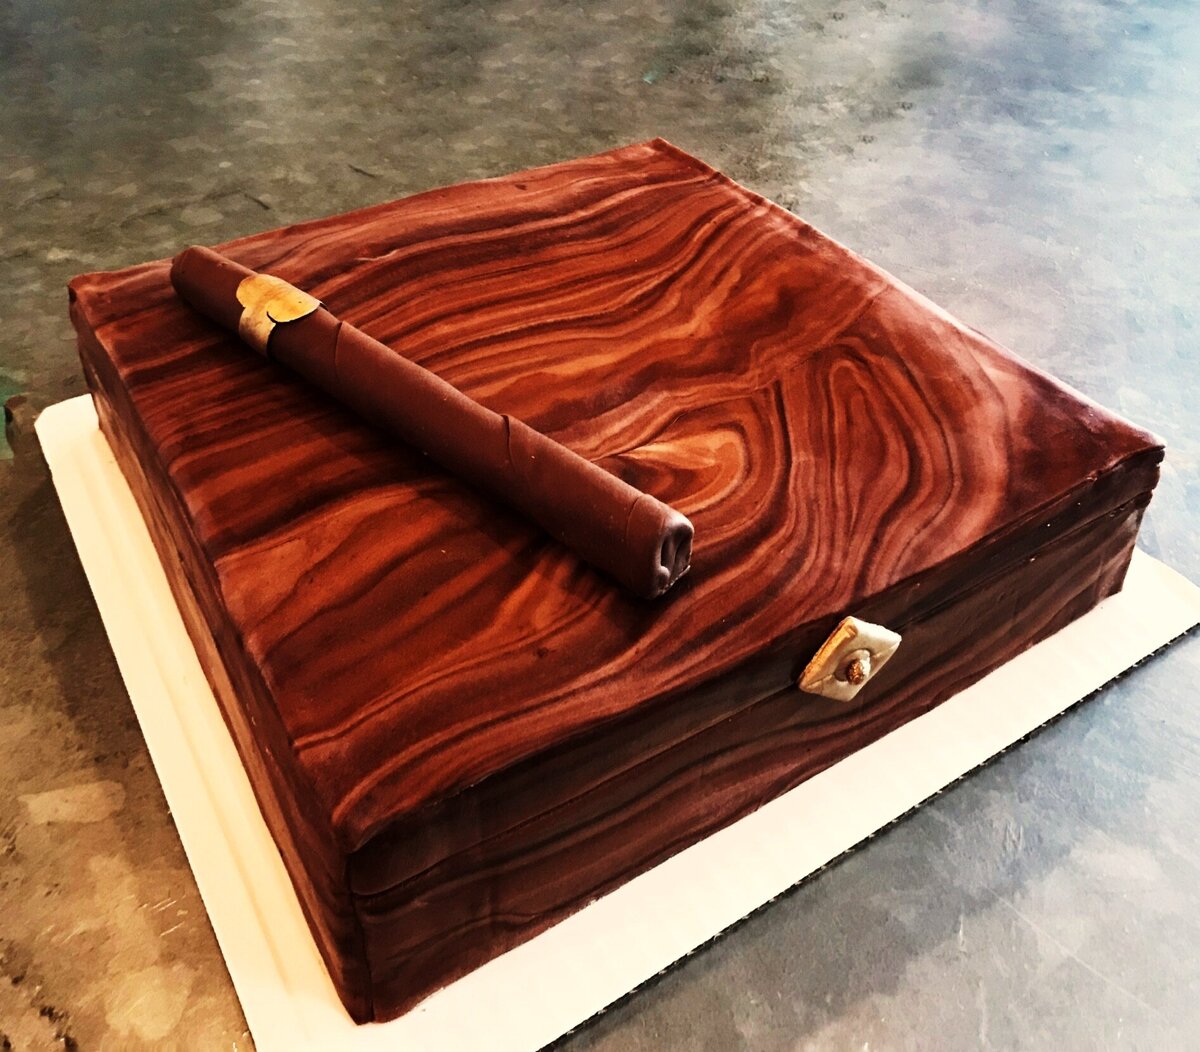 Woodgrain square cigar box cake with rolled fondant cigar on top